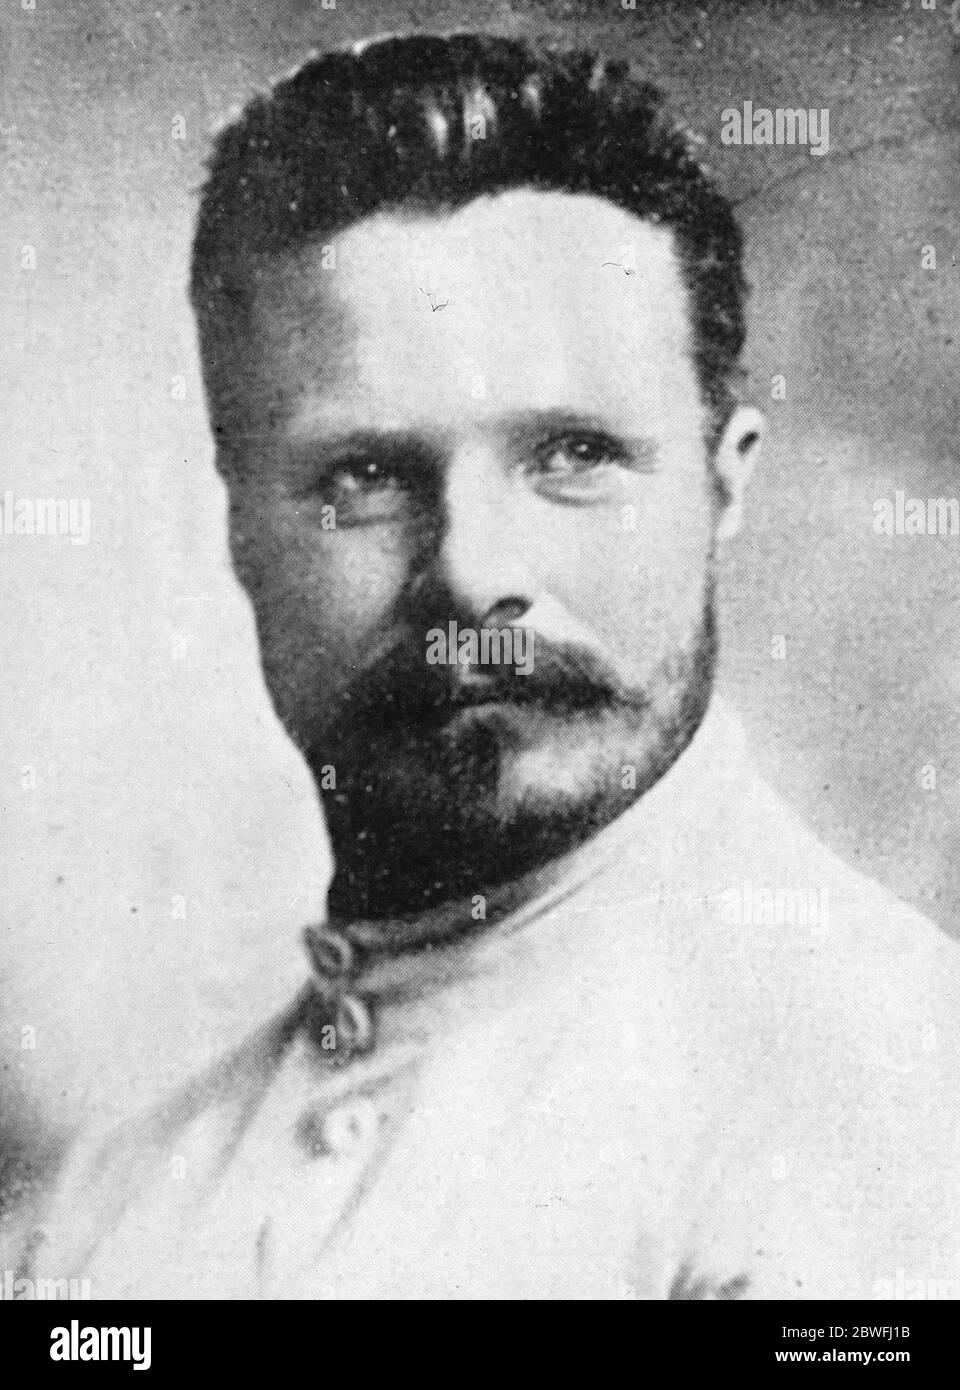 Trotsky ' s Successor . Mikhail Frunze , the successor of Trotsky as Soviet Commissar for the Army and Navy . 12 February 1925 Stock Photo